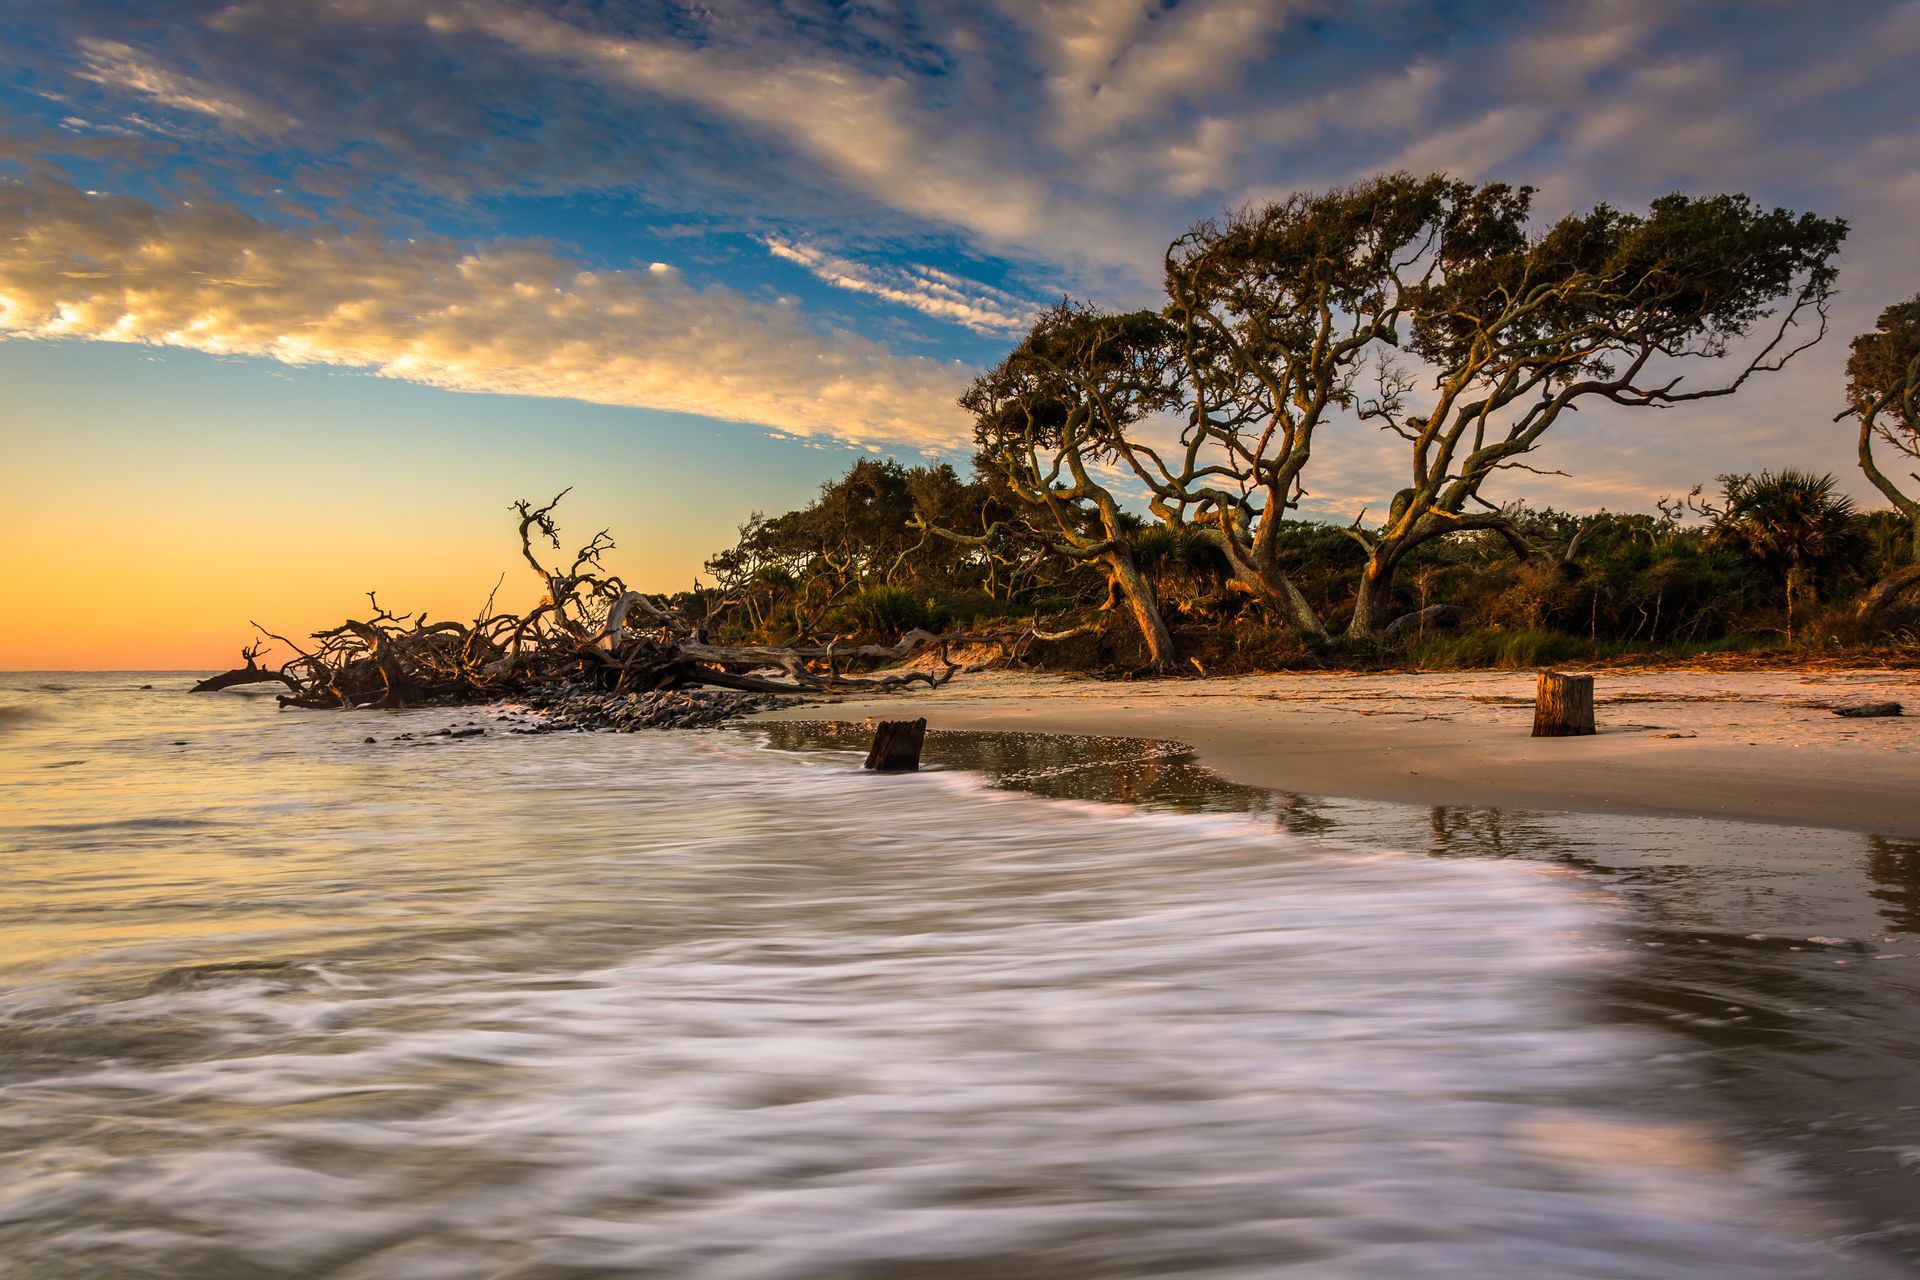 A long exposure photo of a beach at sunset with trees in the foreground.